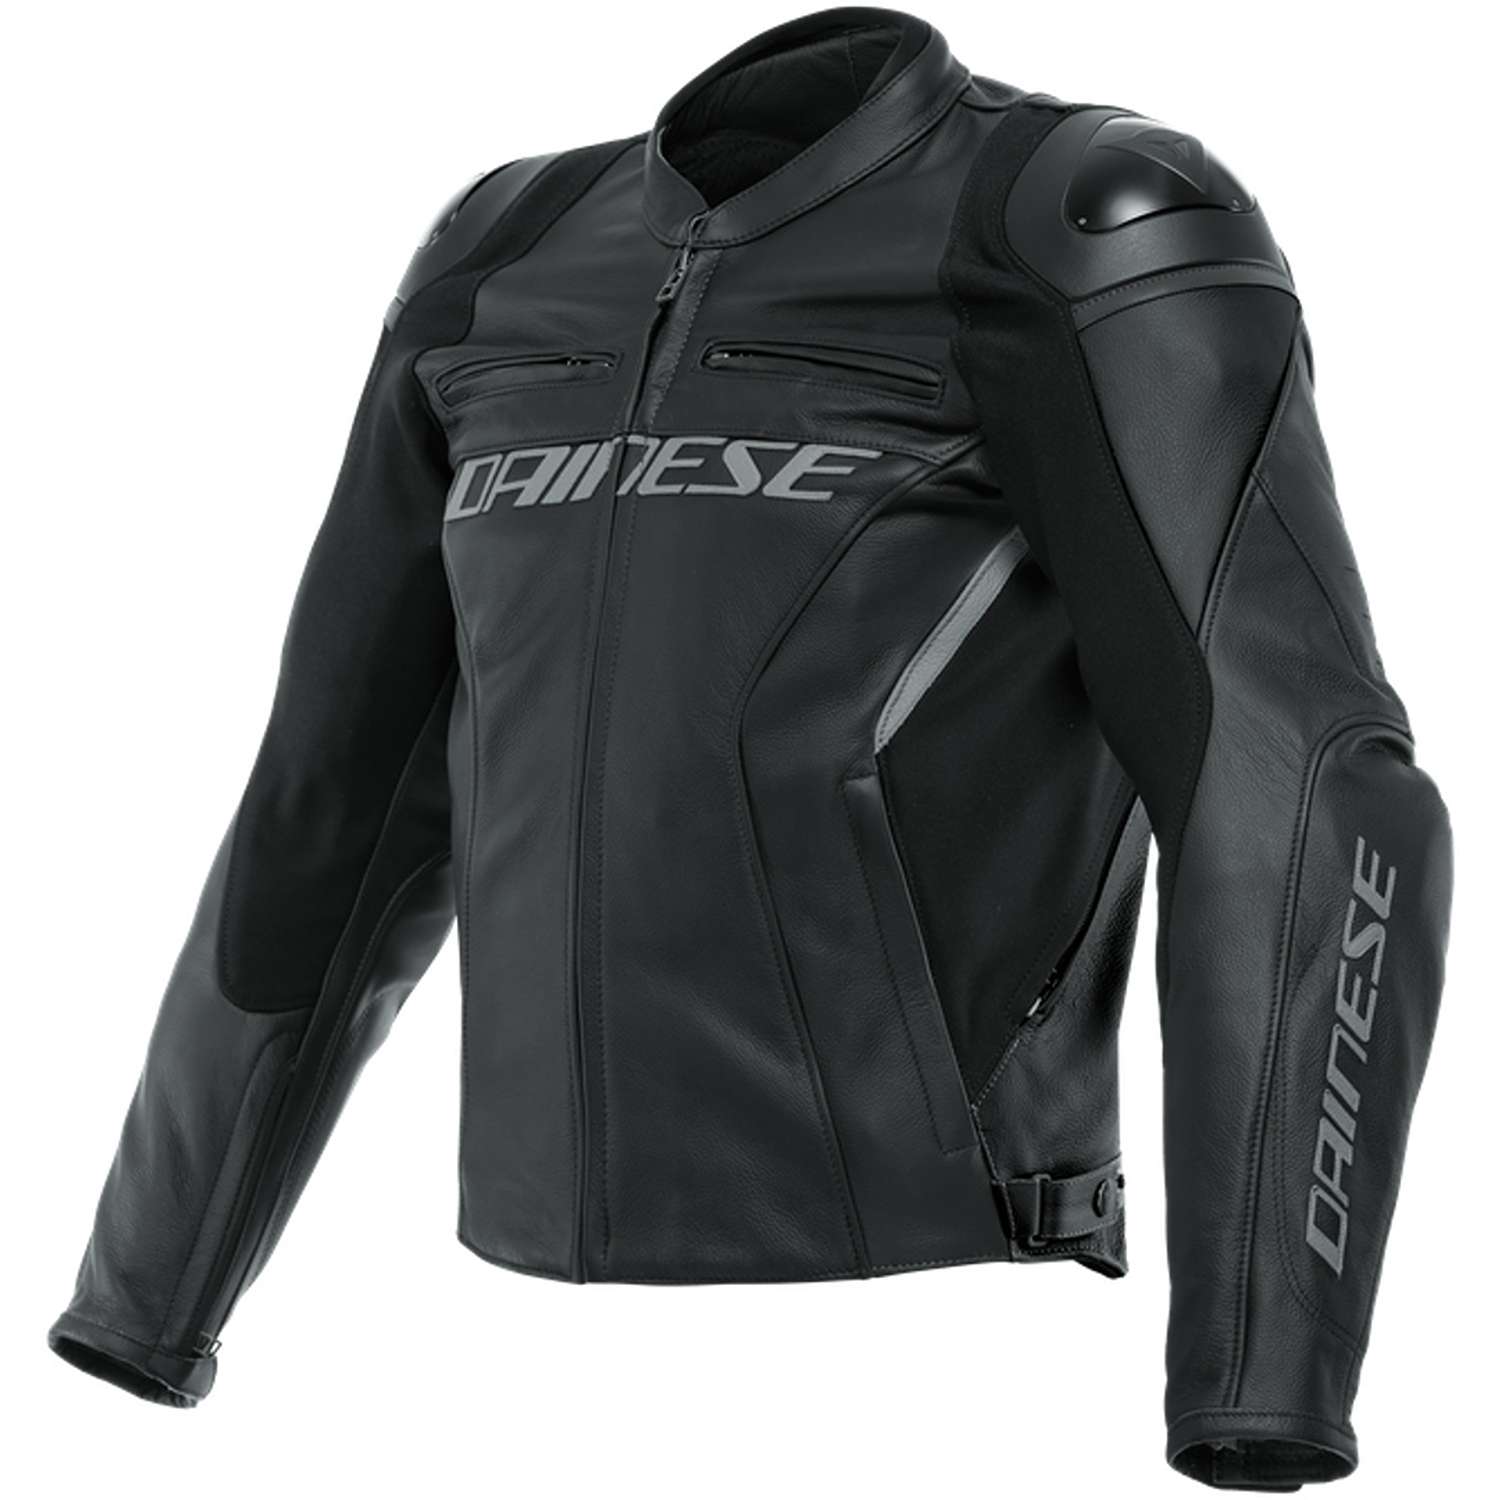 Image of EU Dainese Racing 4 Leather Jacket S/T Black Black Taille 98